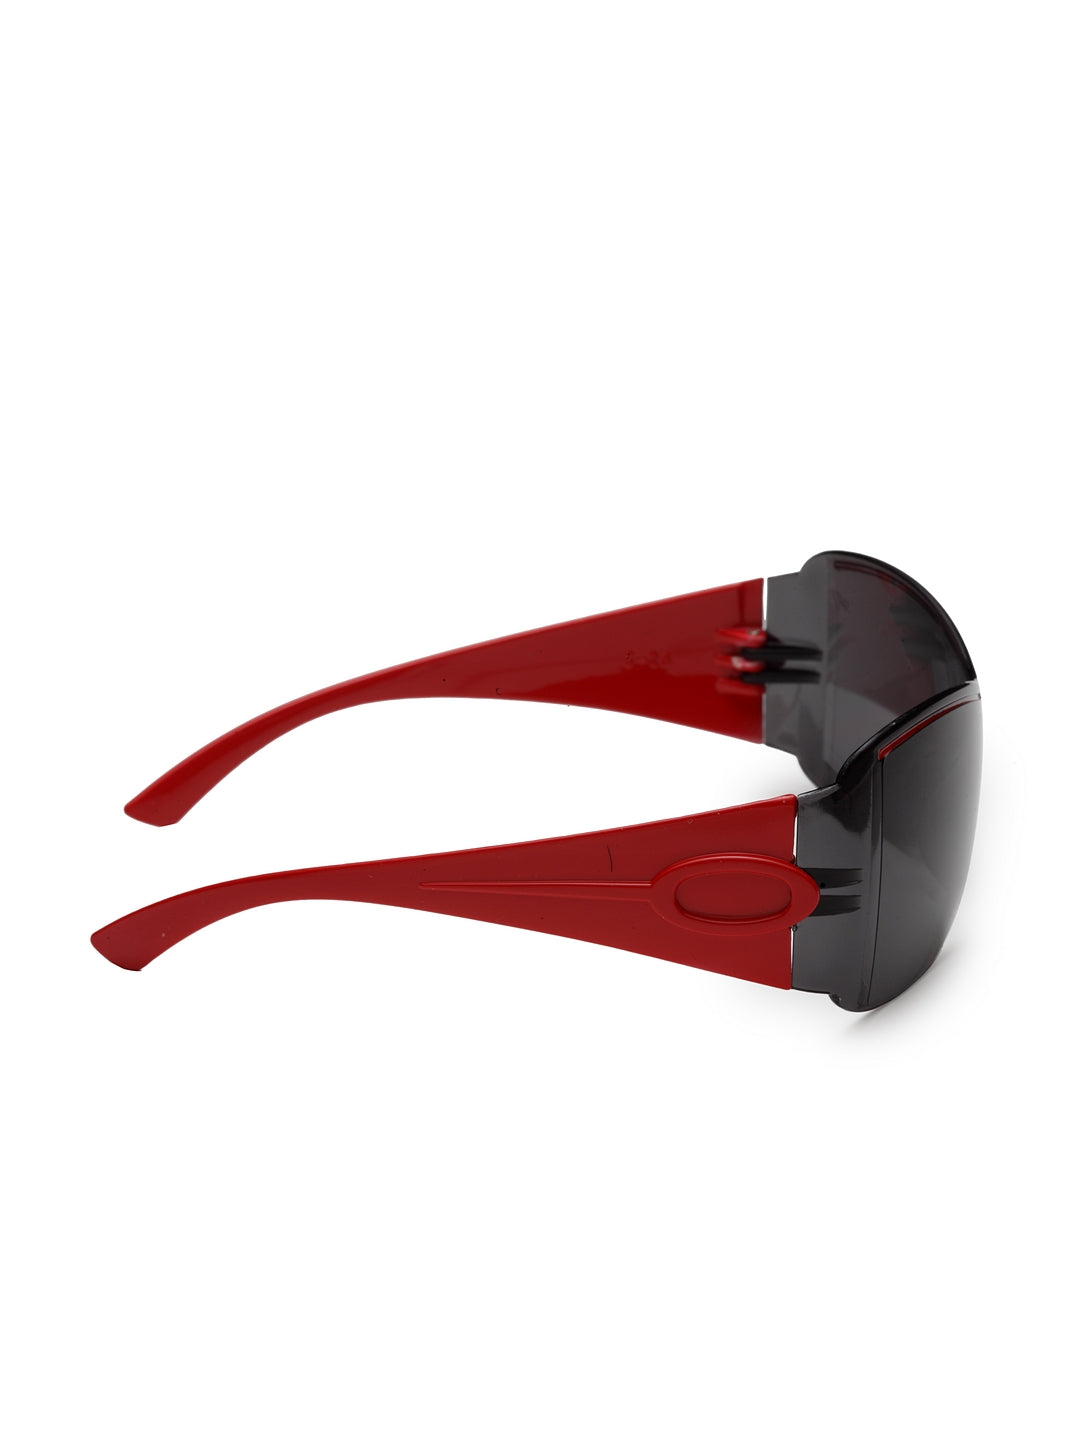 Stol'n Premium Attractive Fashionable UV-Protected Sports Sunglasses - Black and Red